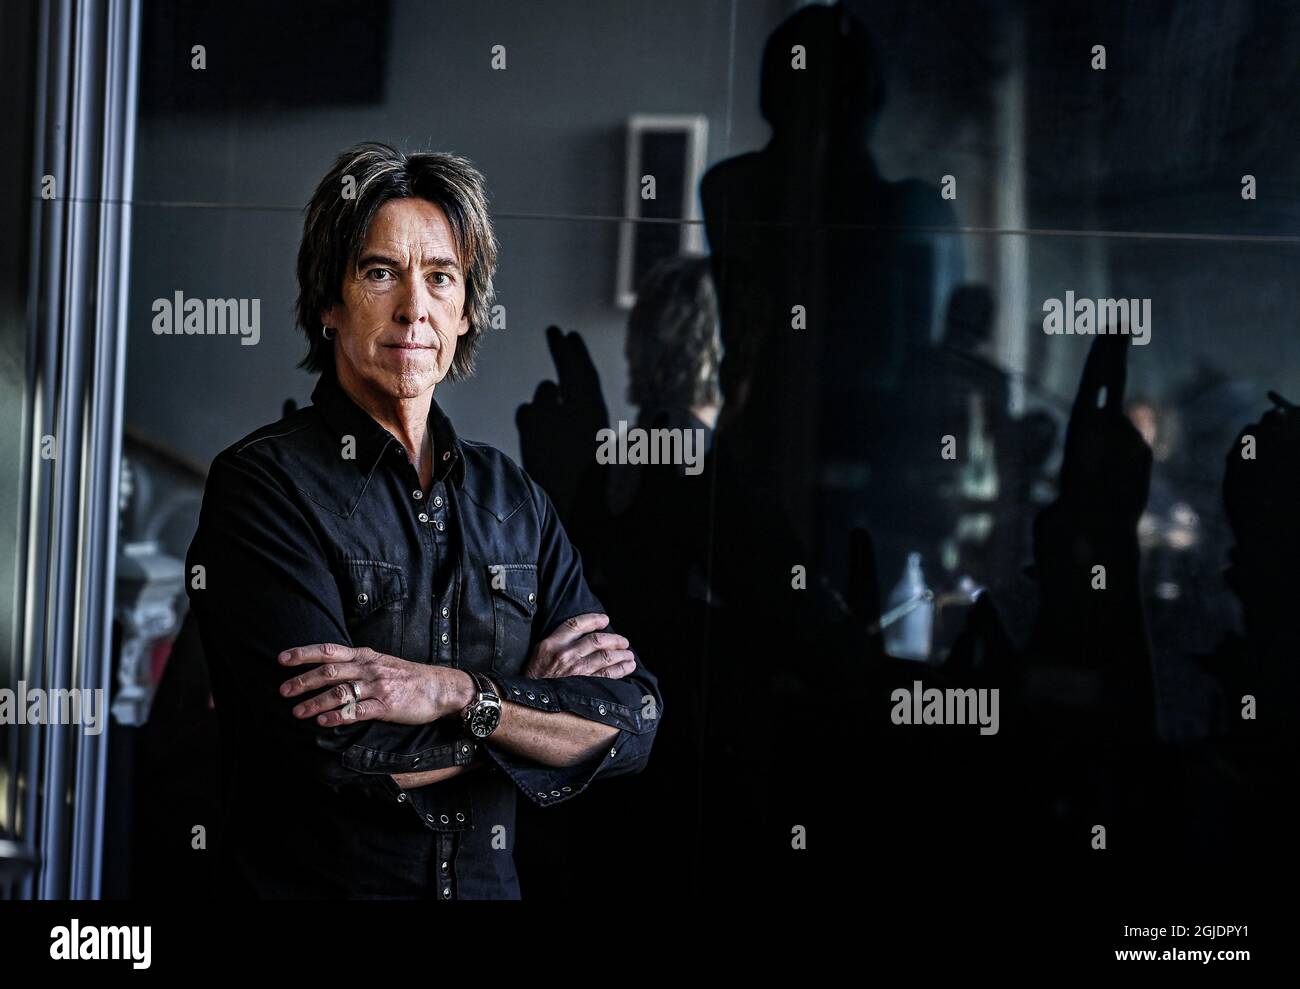 Per Gessle has released his new Swedish solo album 'Gammal kÃ¤rlek rostar aldrig' and the Roxette box 'Bag of trix - music from the Roxette vaults'. Photo: Jimmy Wixtrom / Aftonbladet / TT code 2512 Stock Photo